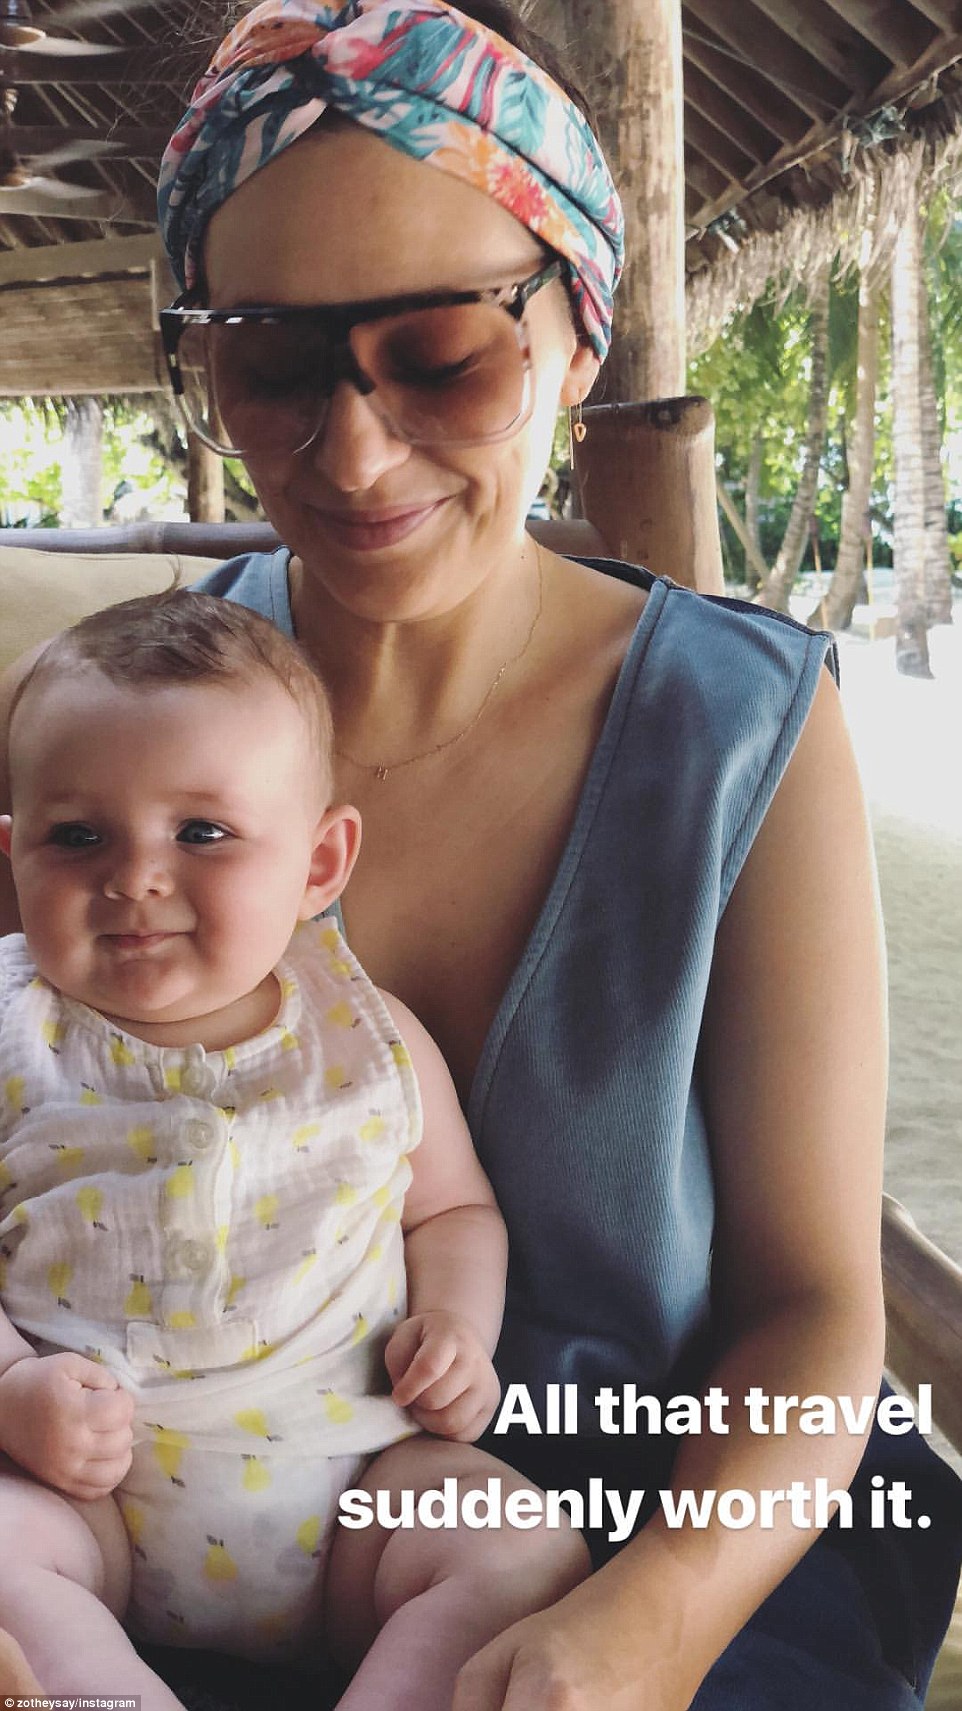 Motherhood goals: The doting mum-of-two shared a second photo to her Insta story that showed her cuddling up to baby Rudy. The cherubic tot looked cute as a button, and perfectly happy in the tropical surroundings as she sat proudly on mum's lap